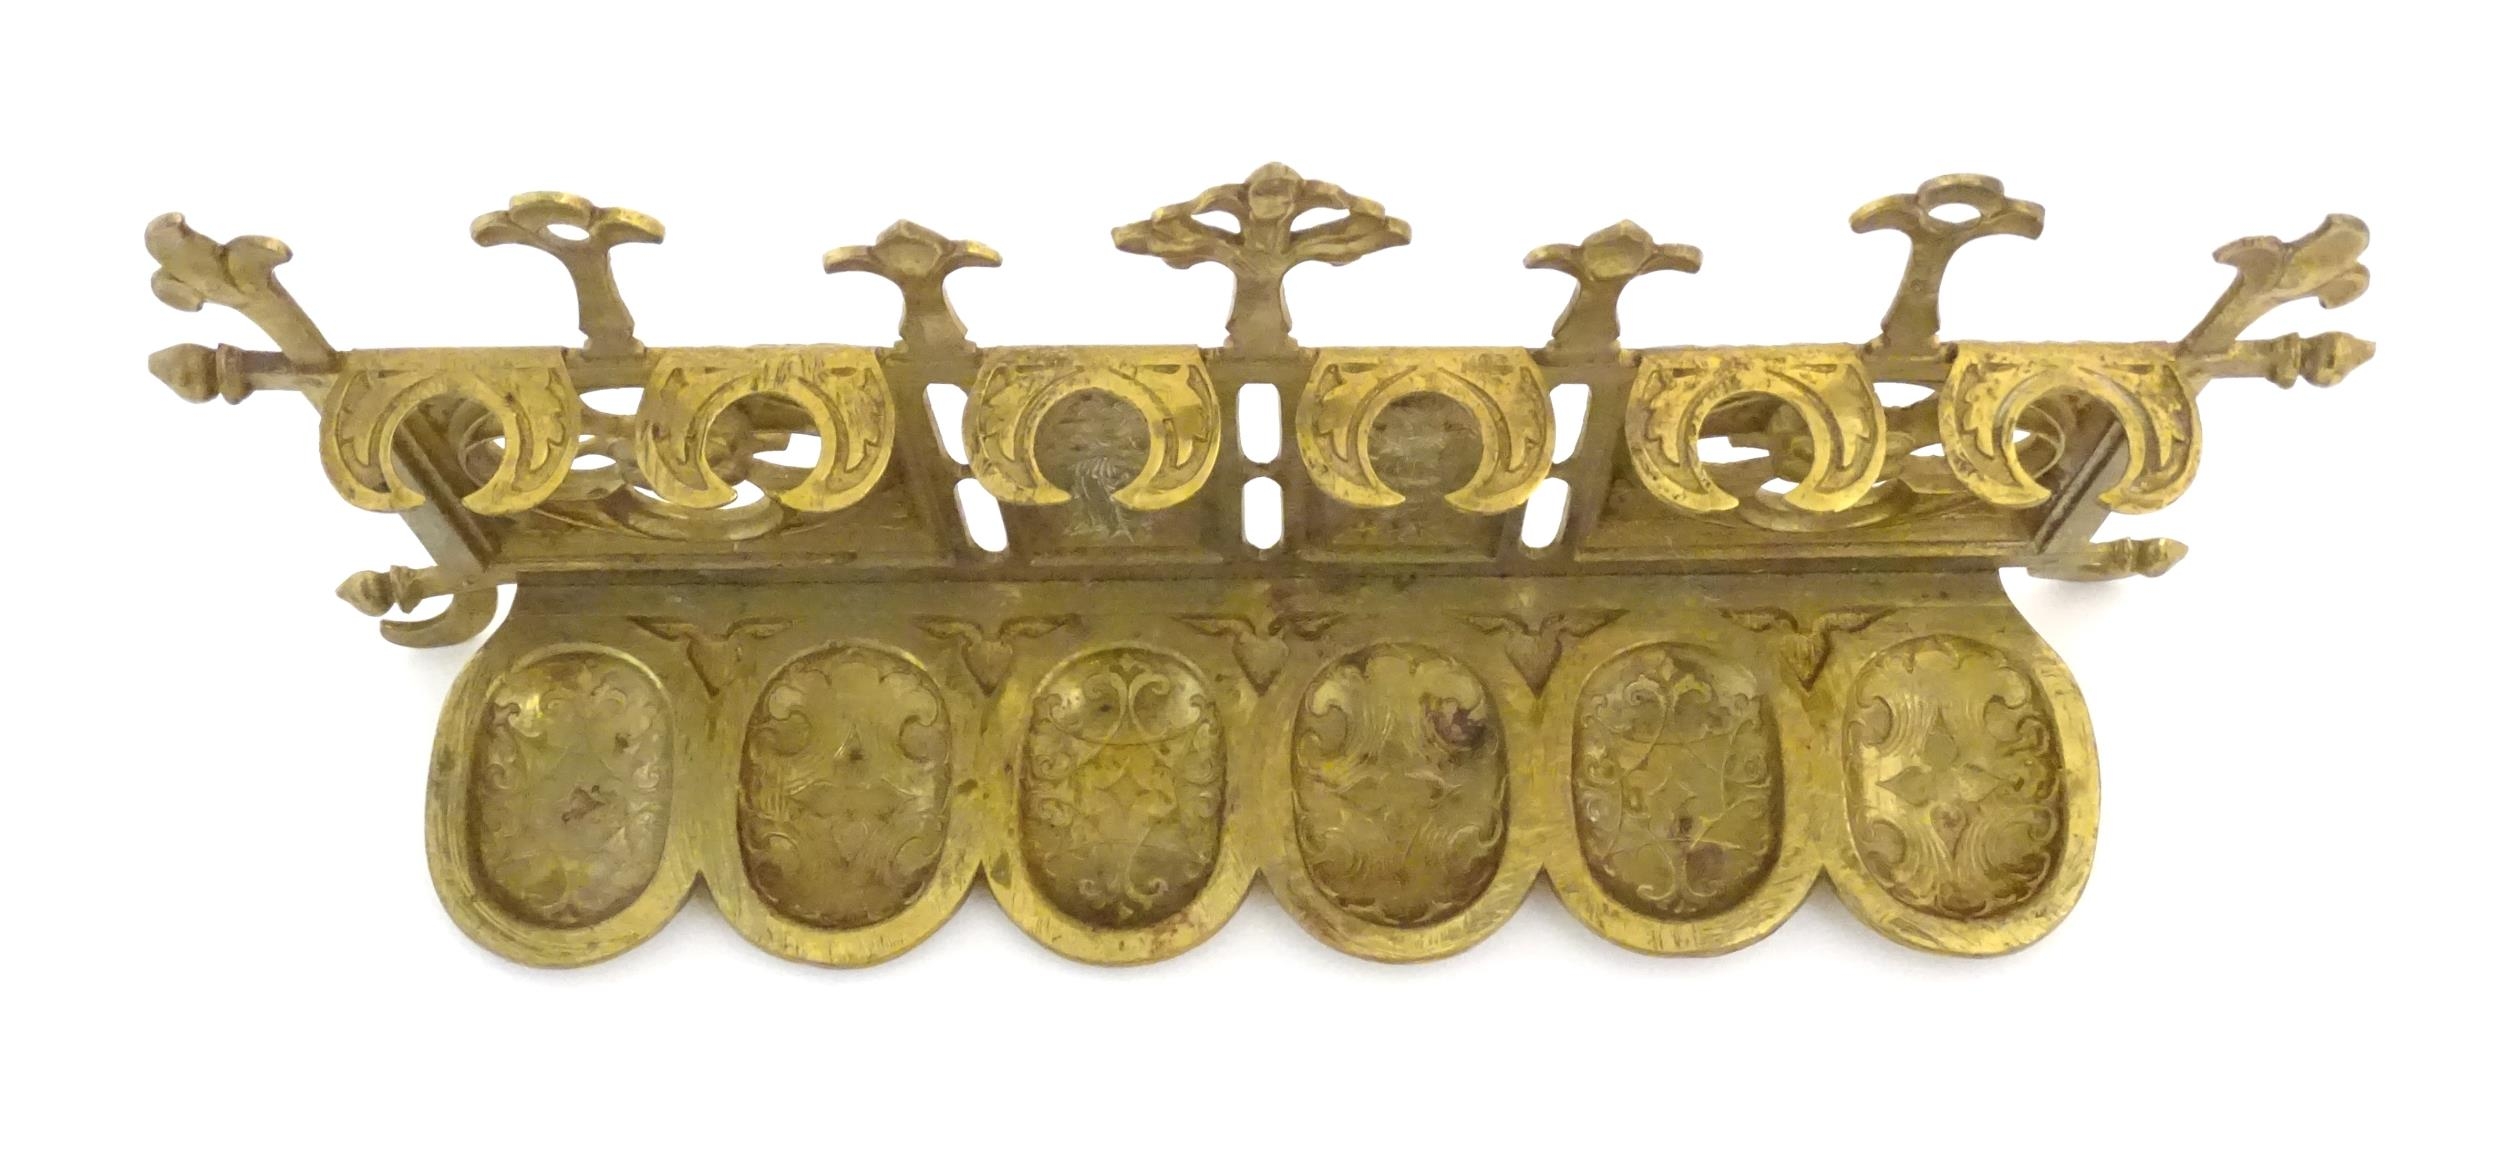 An early 20thC cast brass pipe rack with provision for 6 pipes with Gothic style decoration, pierced - Image 6 of 7